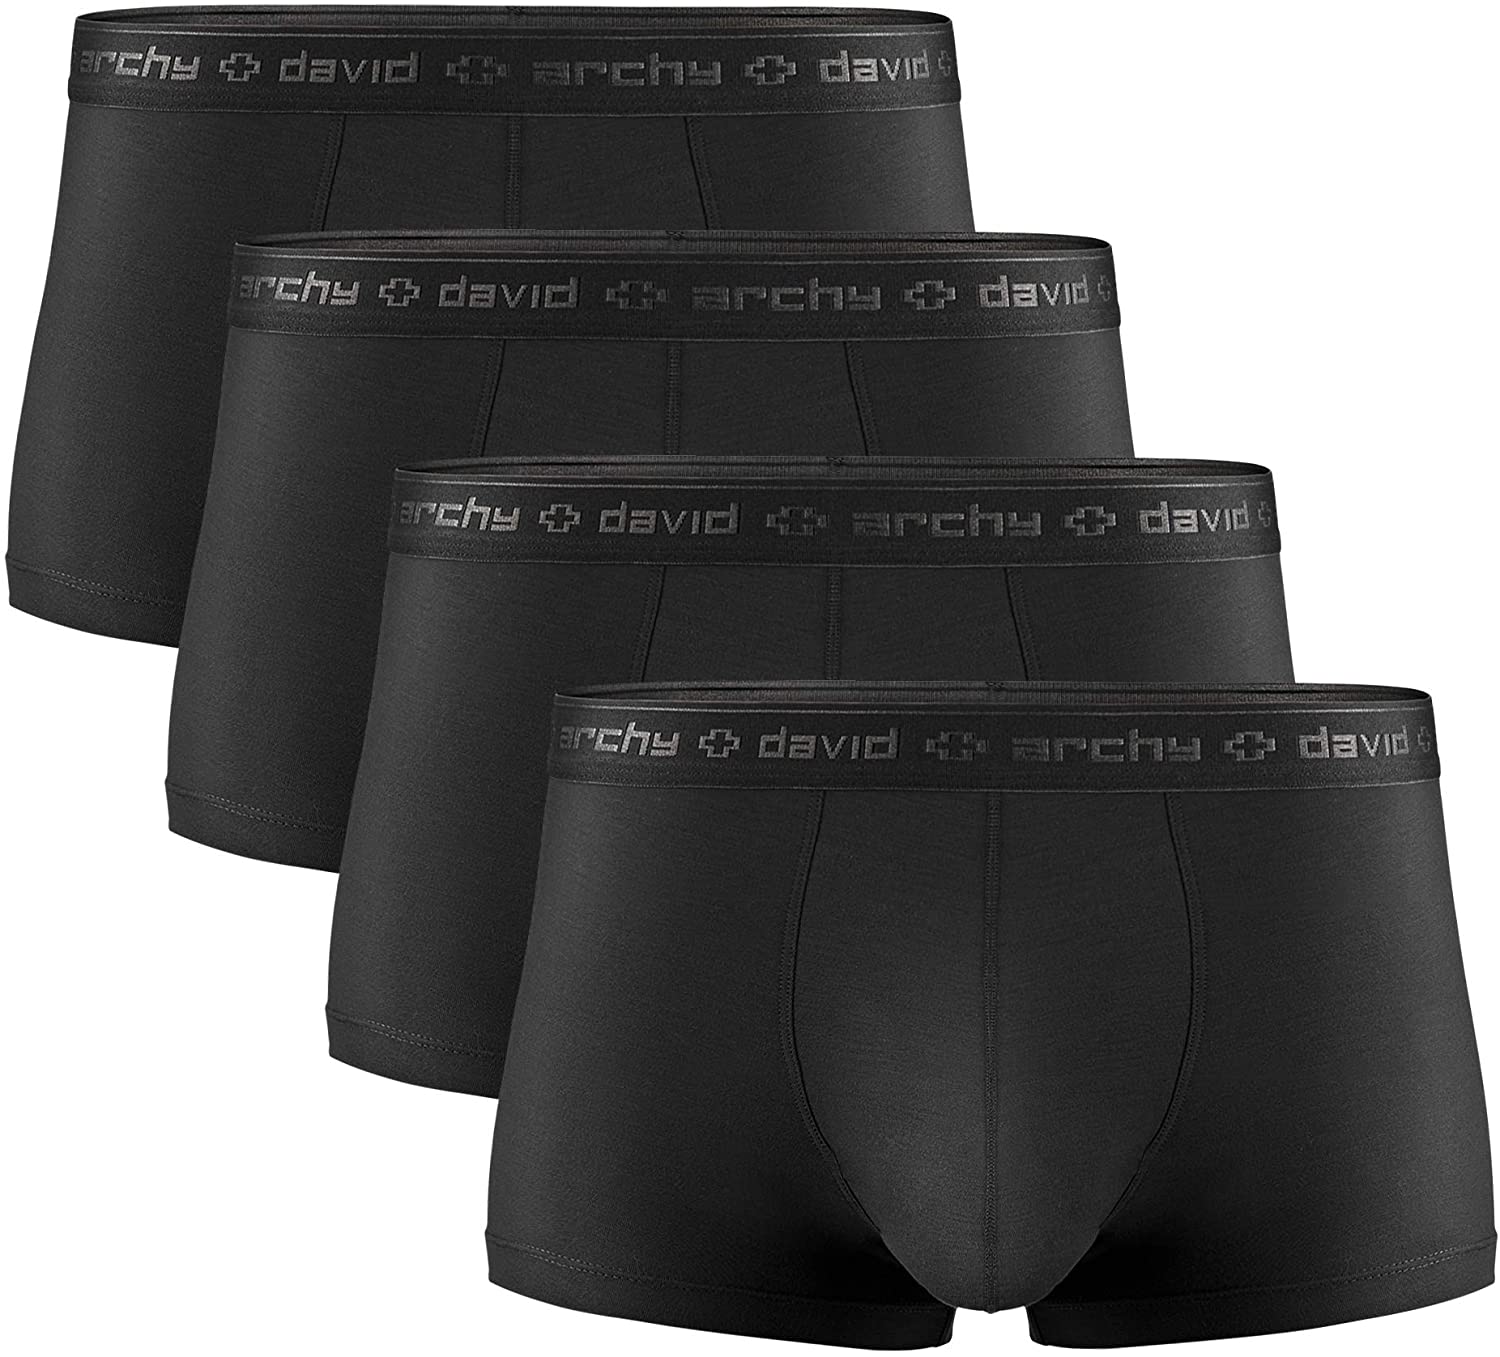  DAVID ARCHY Mens Underwear Micro Modal Dual Pouch Trunks  Support Ball Pouch Bulge Enhancing Boxer Briefs For Men 4 Pack